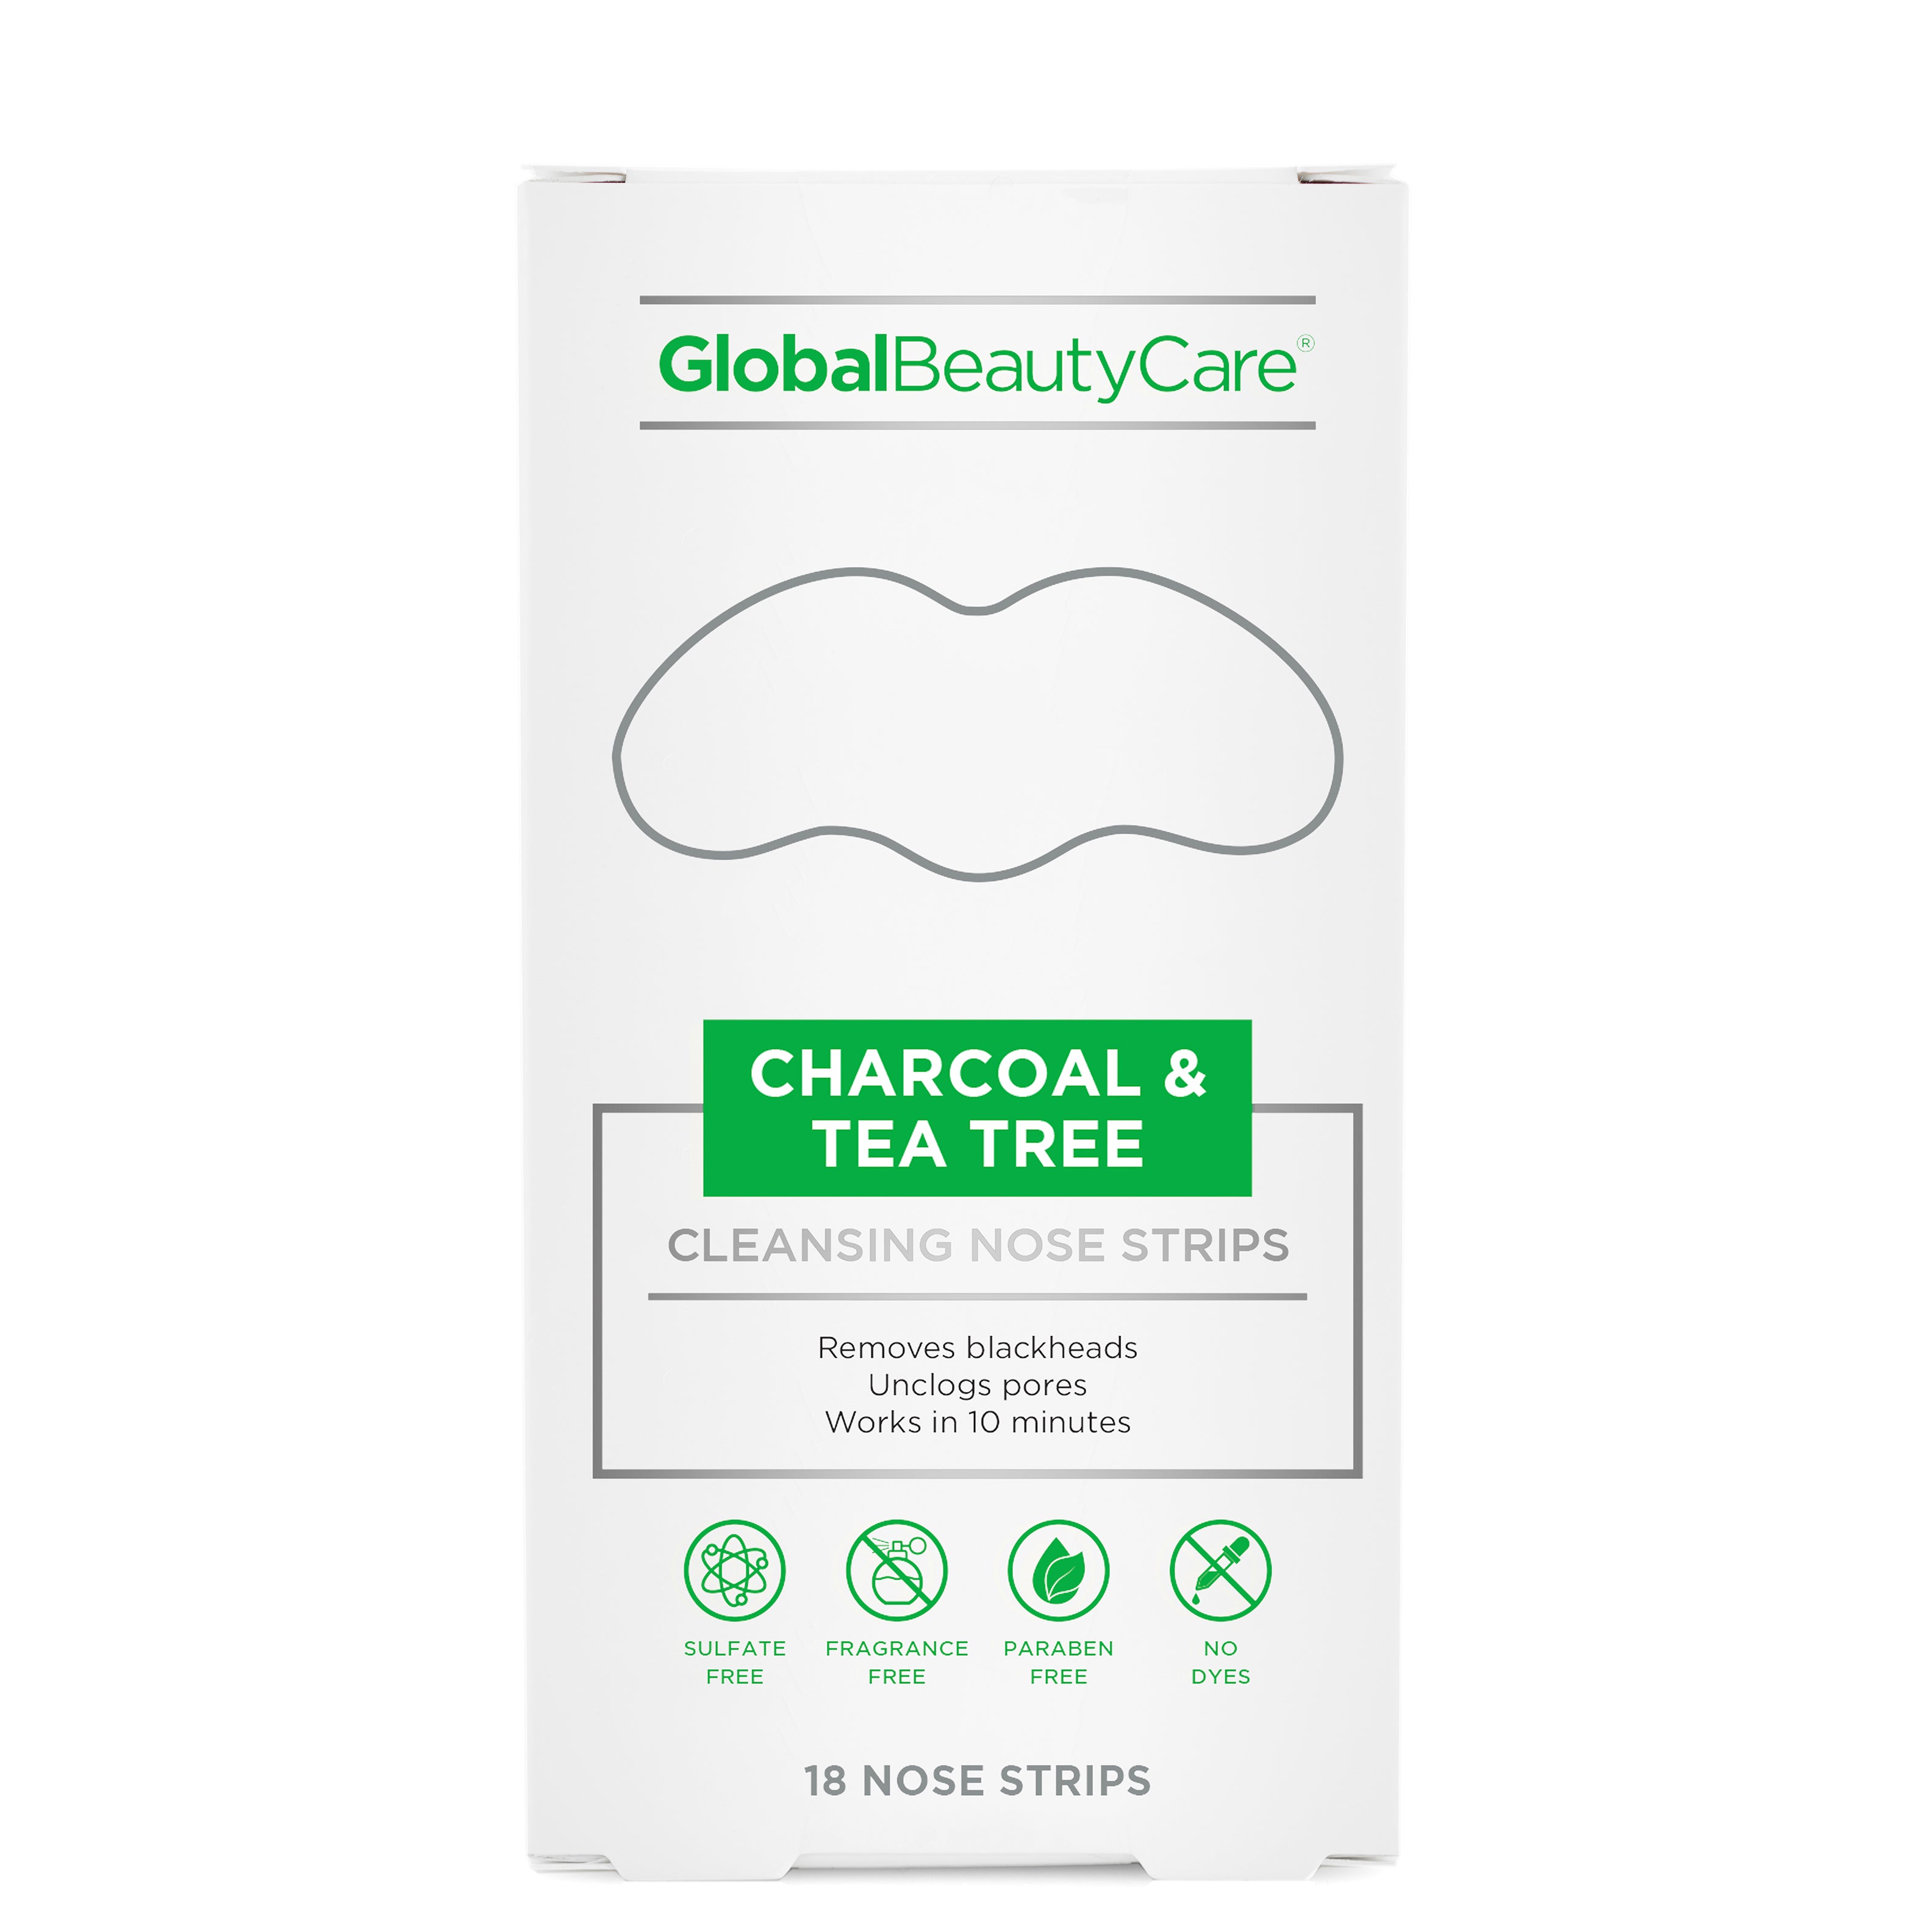 Charcoal & Tea Tree Cleansing Nose Strips